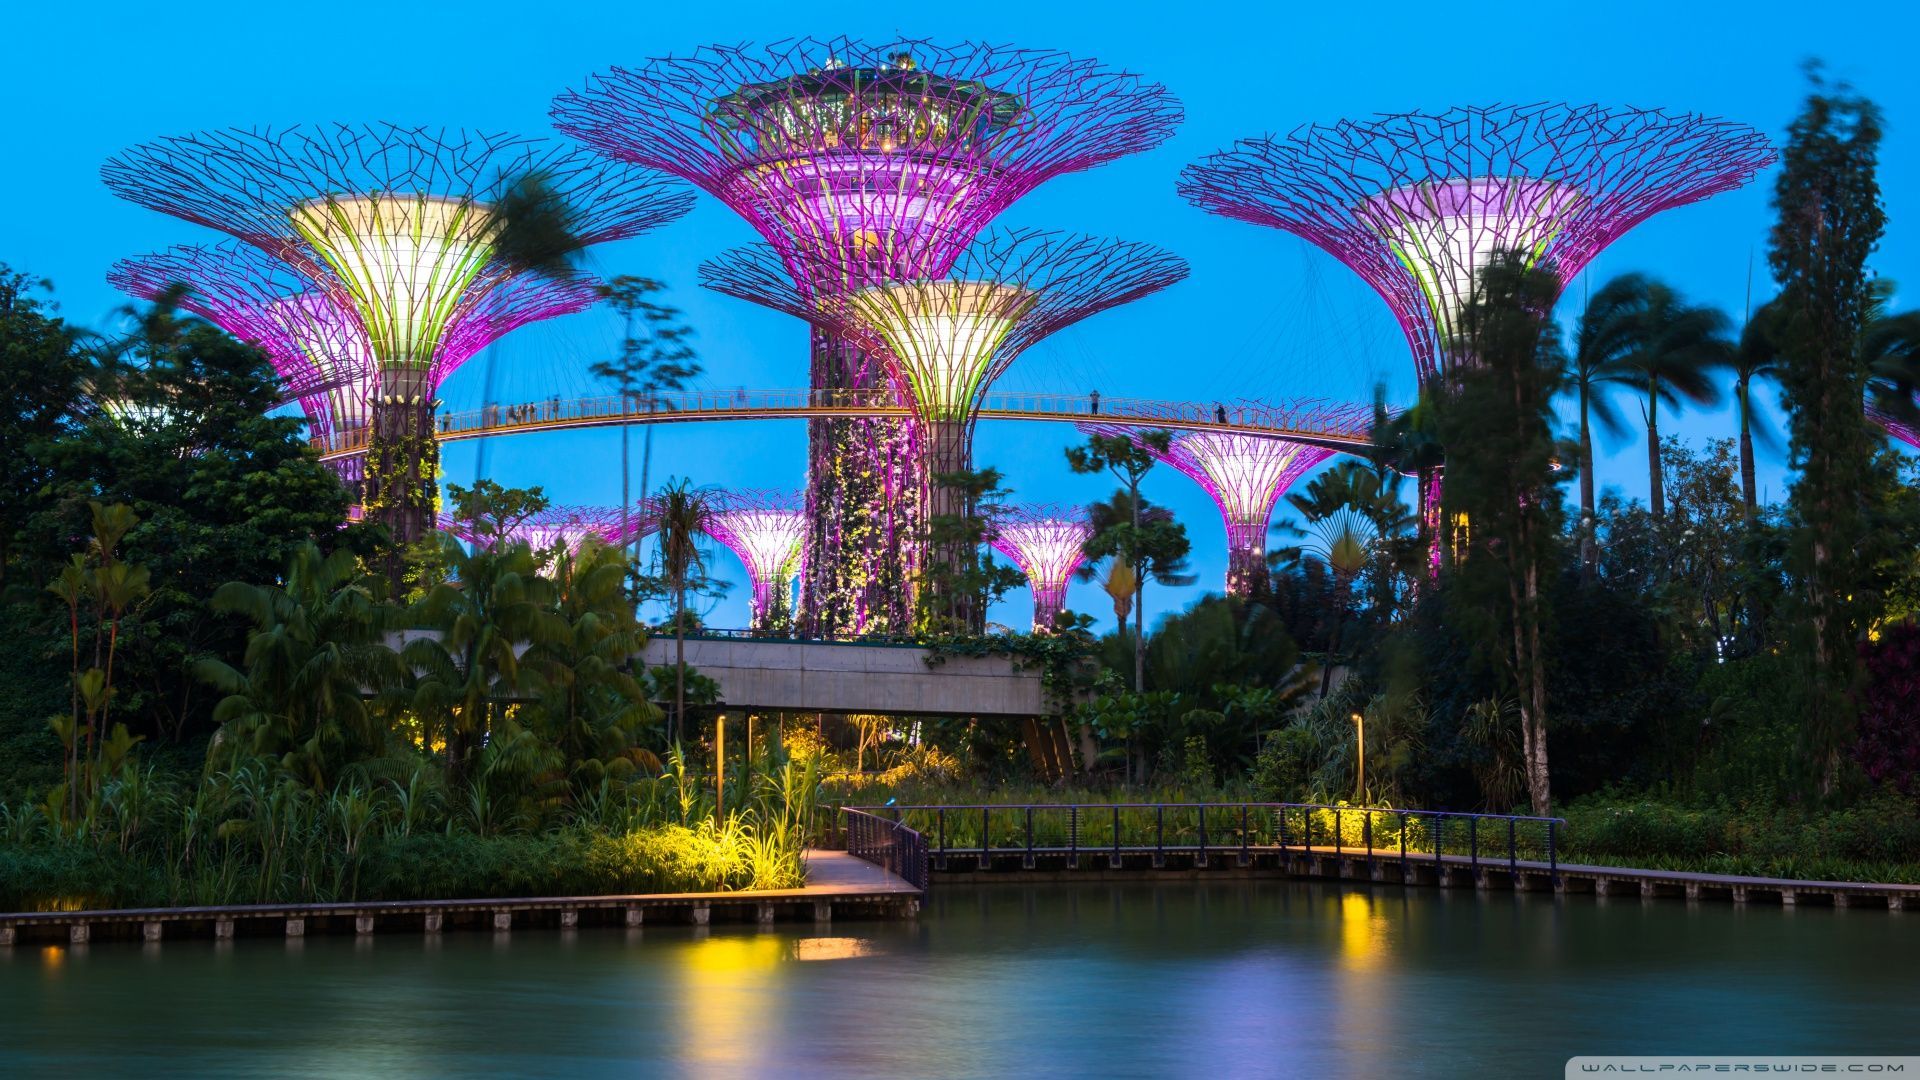 Supertree grove gardens by the bay singapore HD wallpaper [19201080] #Hdwallpaper #wallpaper #image. Singapore garden, Gardens by the bay, Tower garden